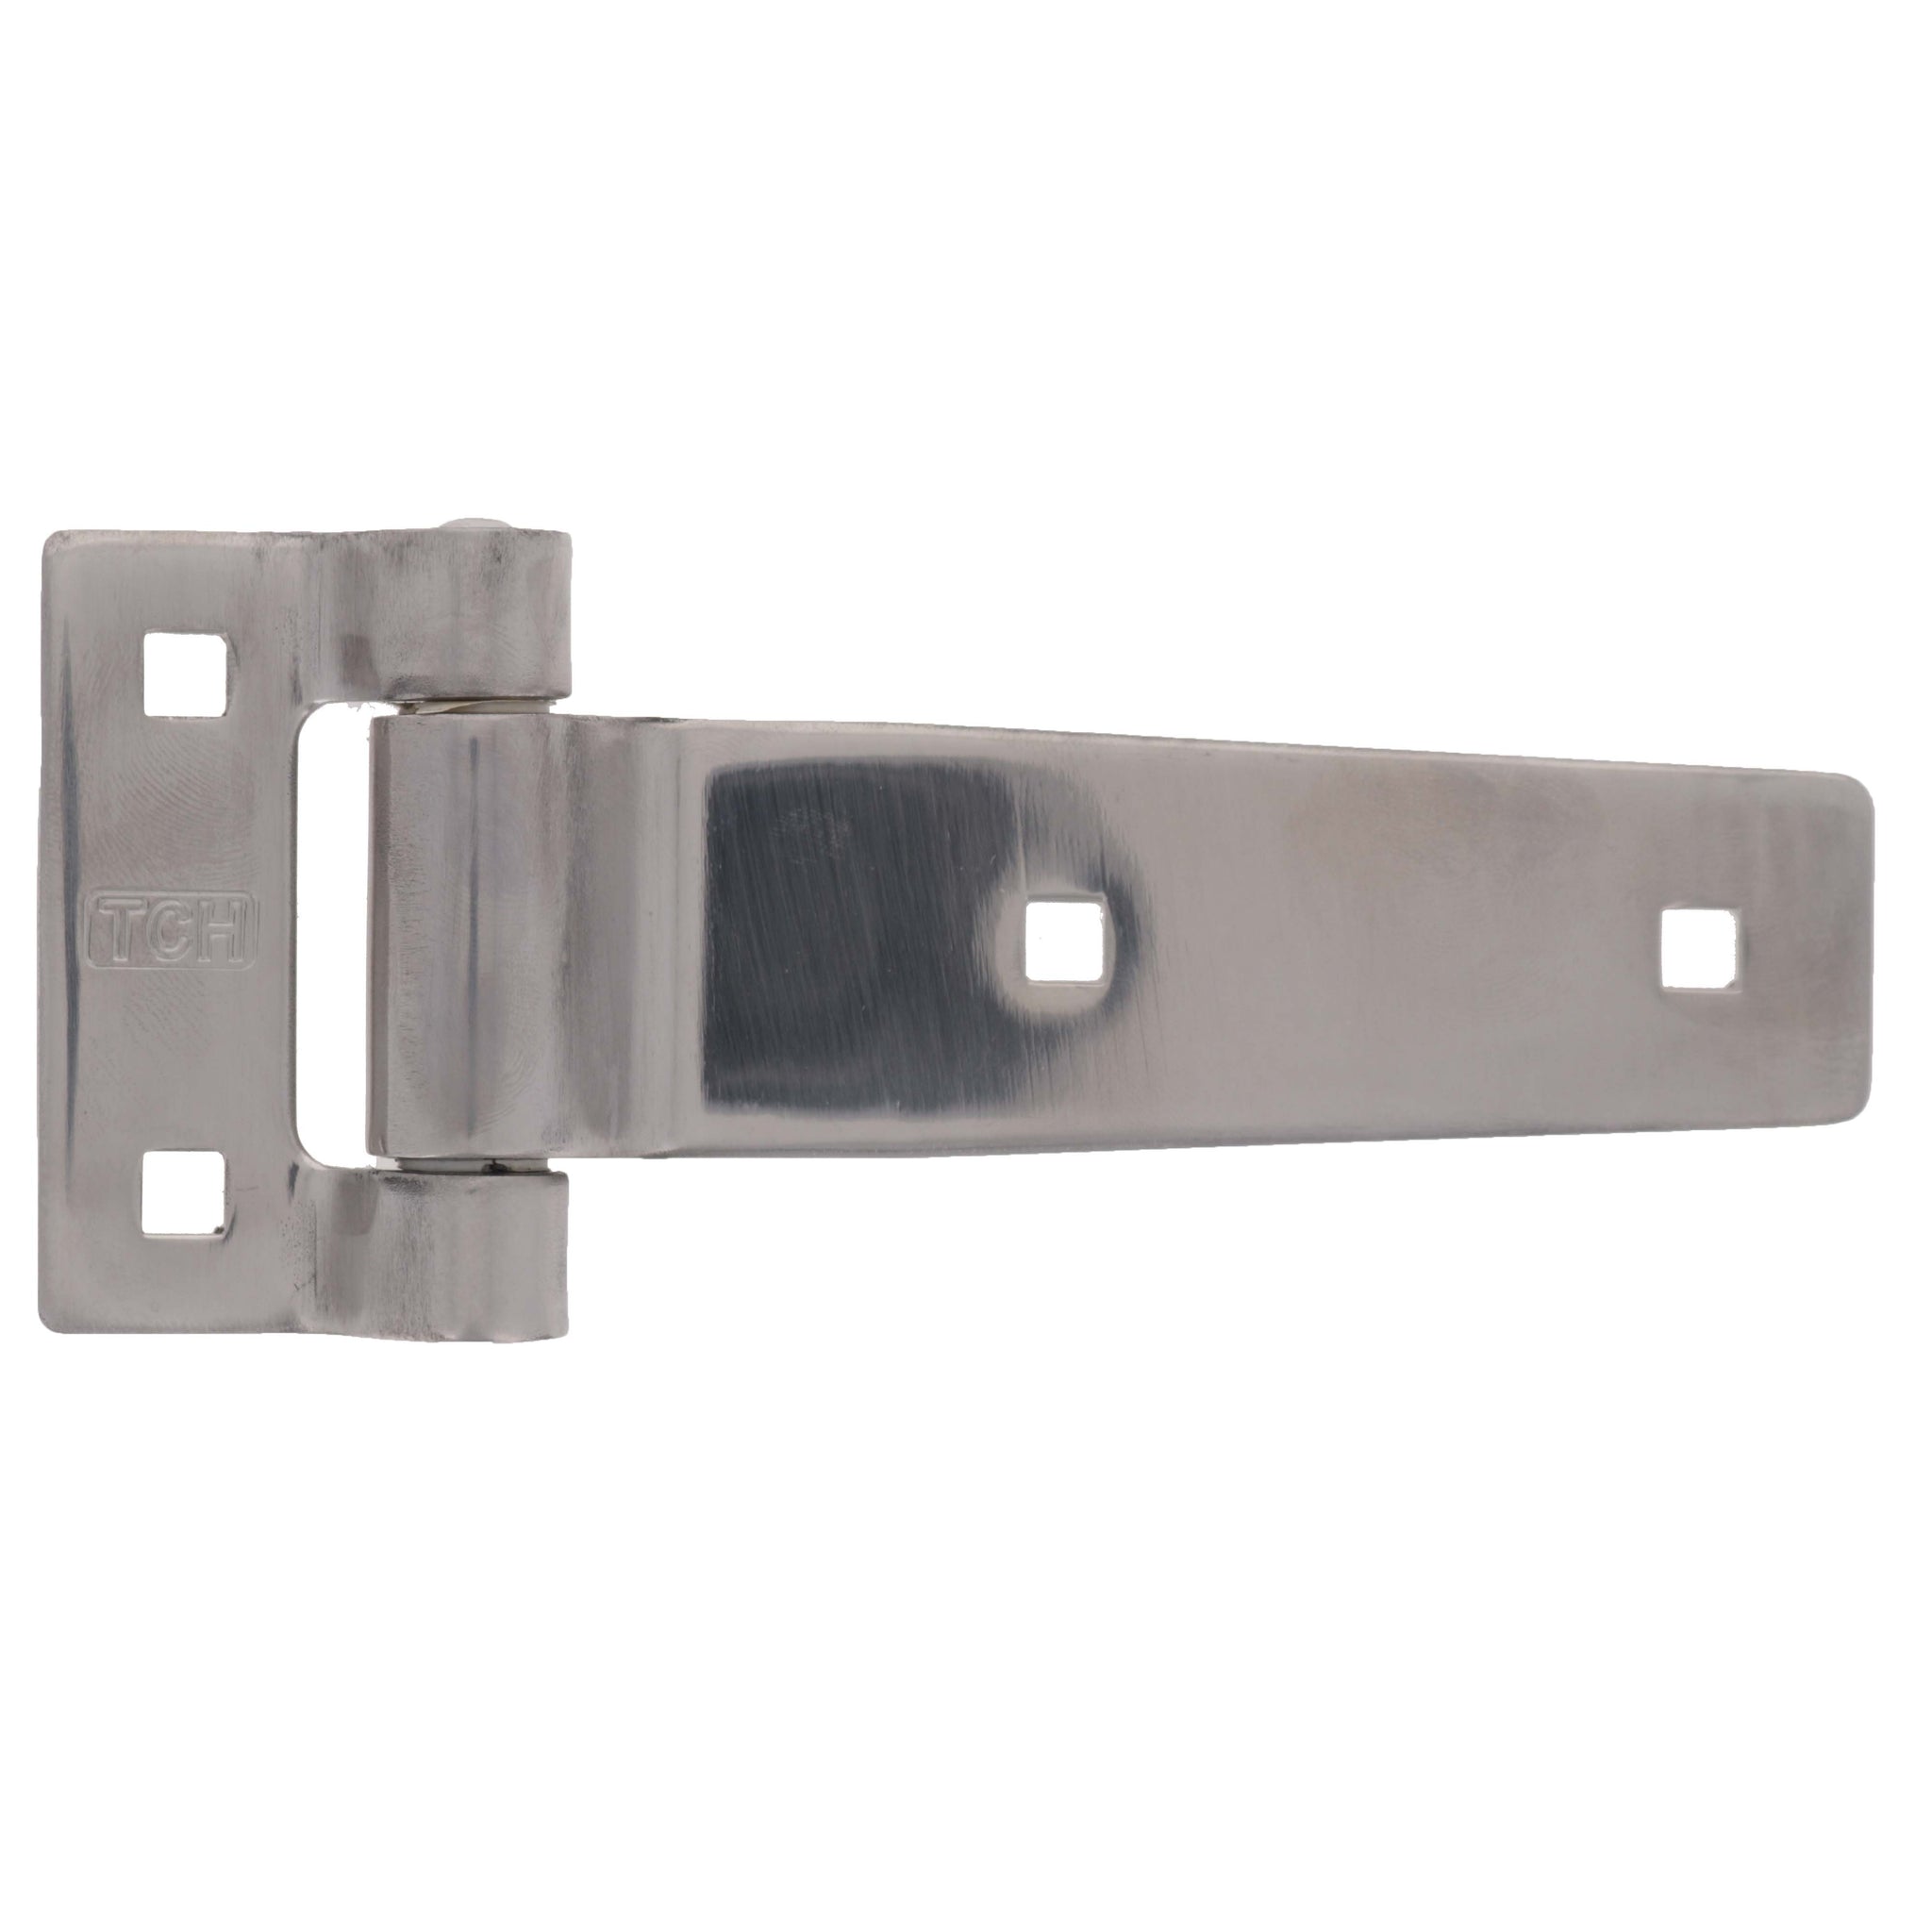 TCH - 5 Polished Stainless Steel Strap Hinge